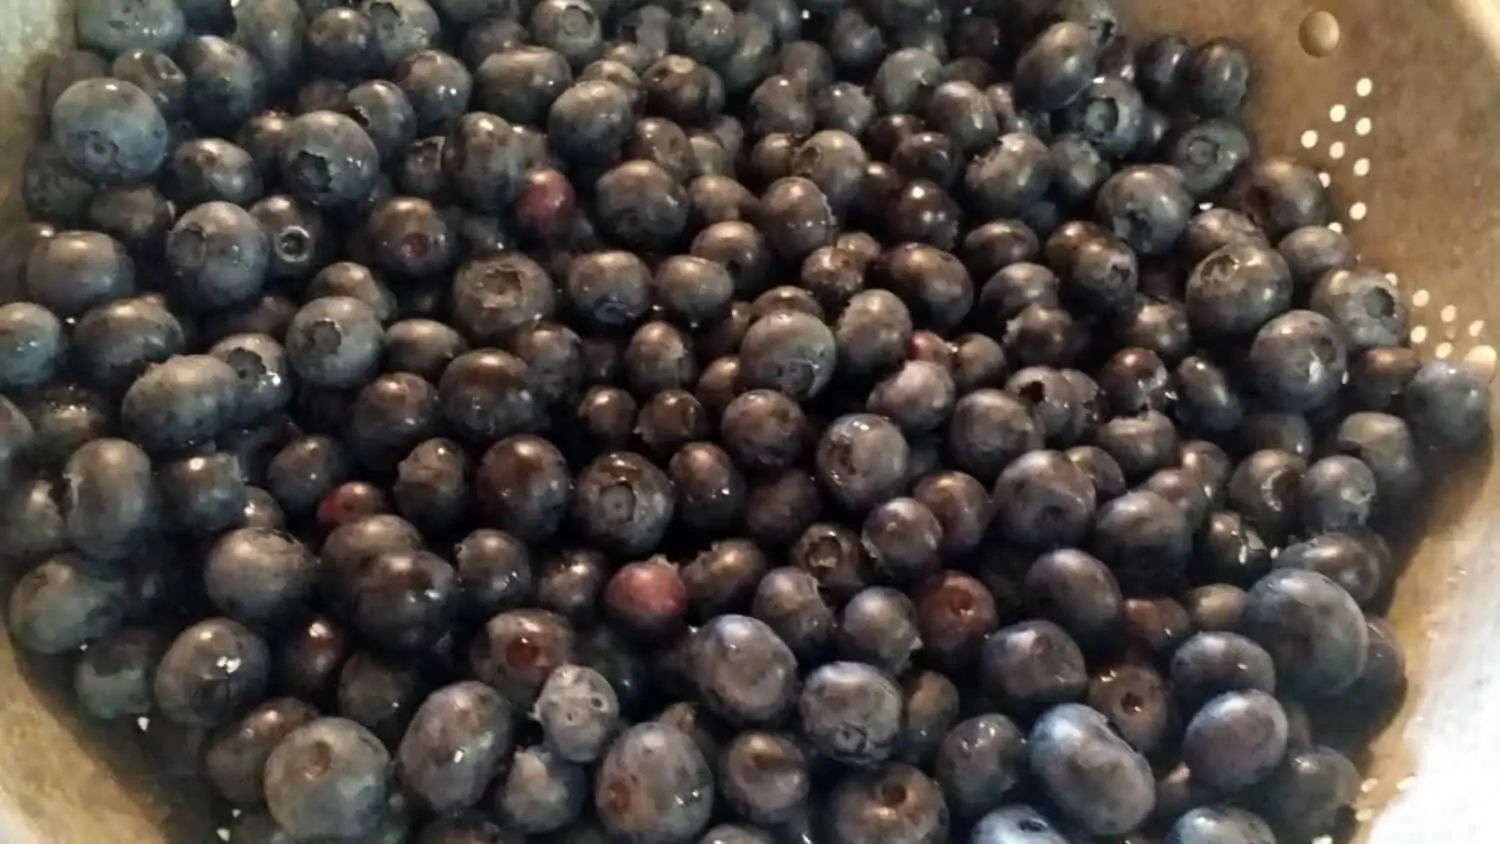 Blueberries in strainer for canning